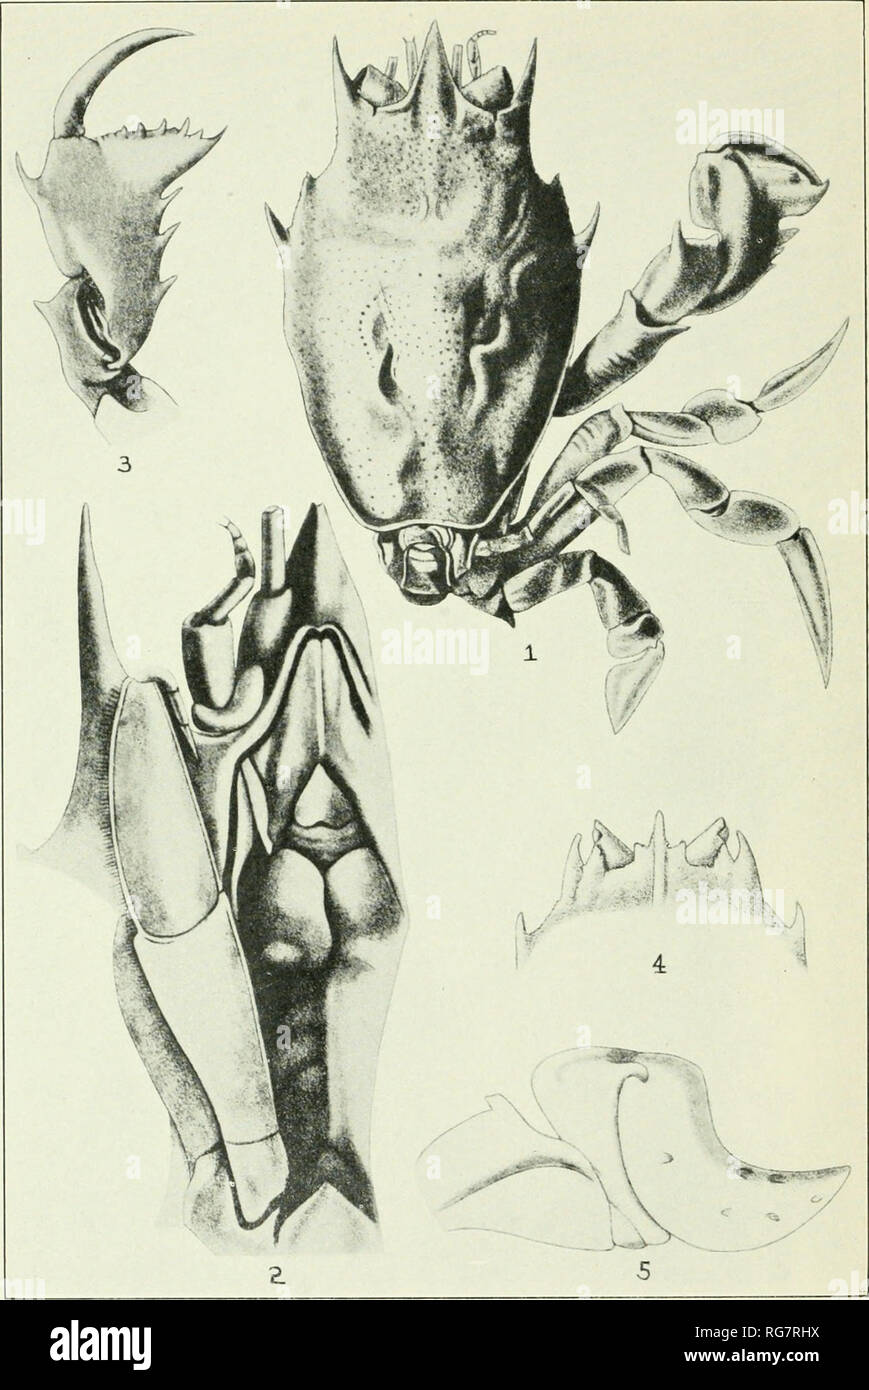 . Bulletin - United States National Museum. Science. U. S. NATIONAL MUSEUM BULLETIN 166 PLATE 2. Species of Raninoides. 1, R. nitidus, male holotype, S mm long, X 7, dorsal view; 2, same, right frontobuccal region with append- ages, X 22; 3, R.fossoT, type, right chela and carpus, outer face, X 7; 4, same, anterior part of carapace and ocular peduncles, X 3, dorsal view; 5, same, extremity of second ambulatory foot, X 7. (After A. Milne Edwards and Bouvier.). Please note that these images are extracted from scanned page images that may have been digitally enhanced for readability - coloration  Stock Photo